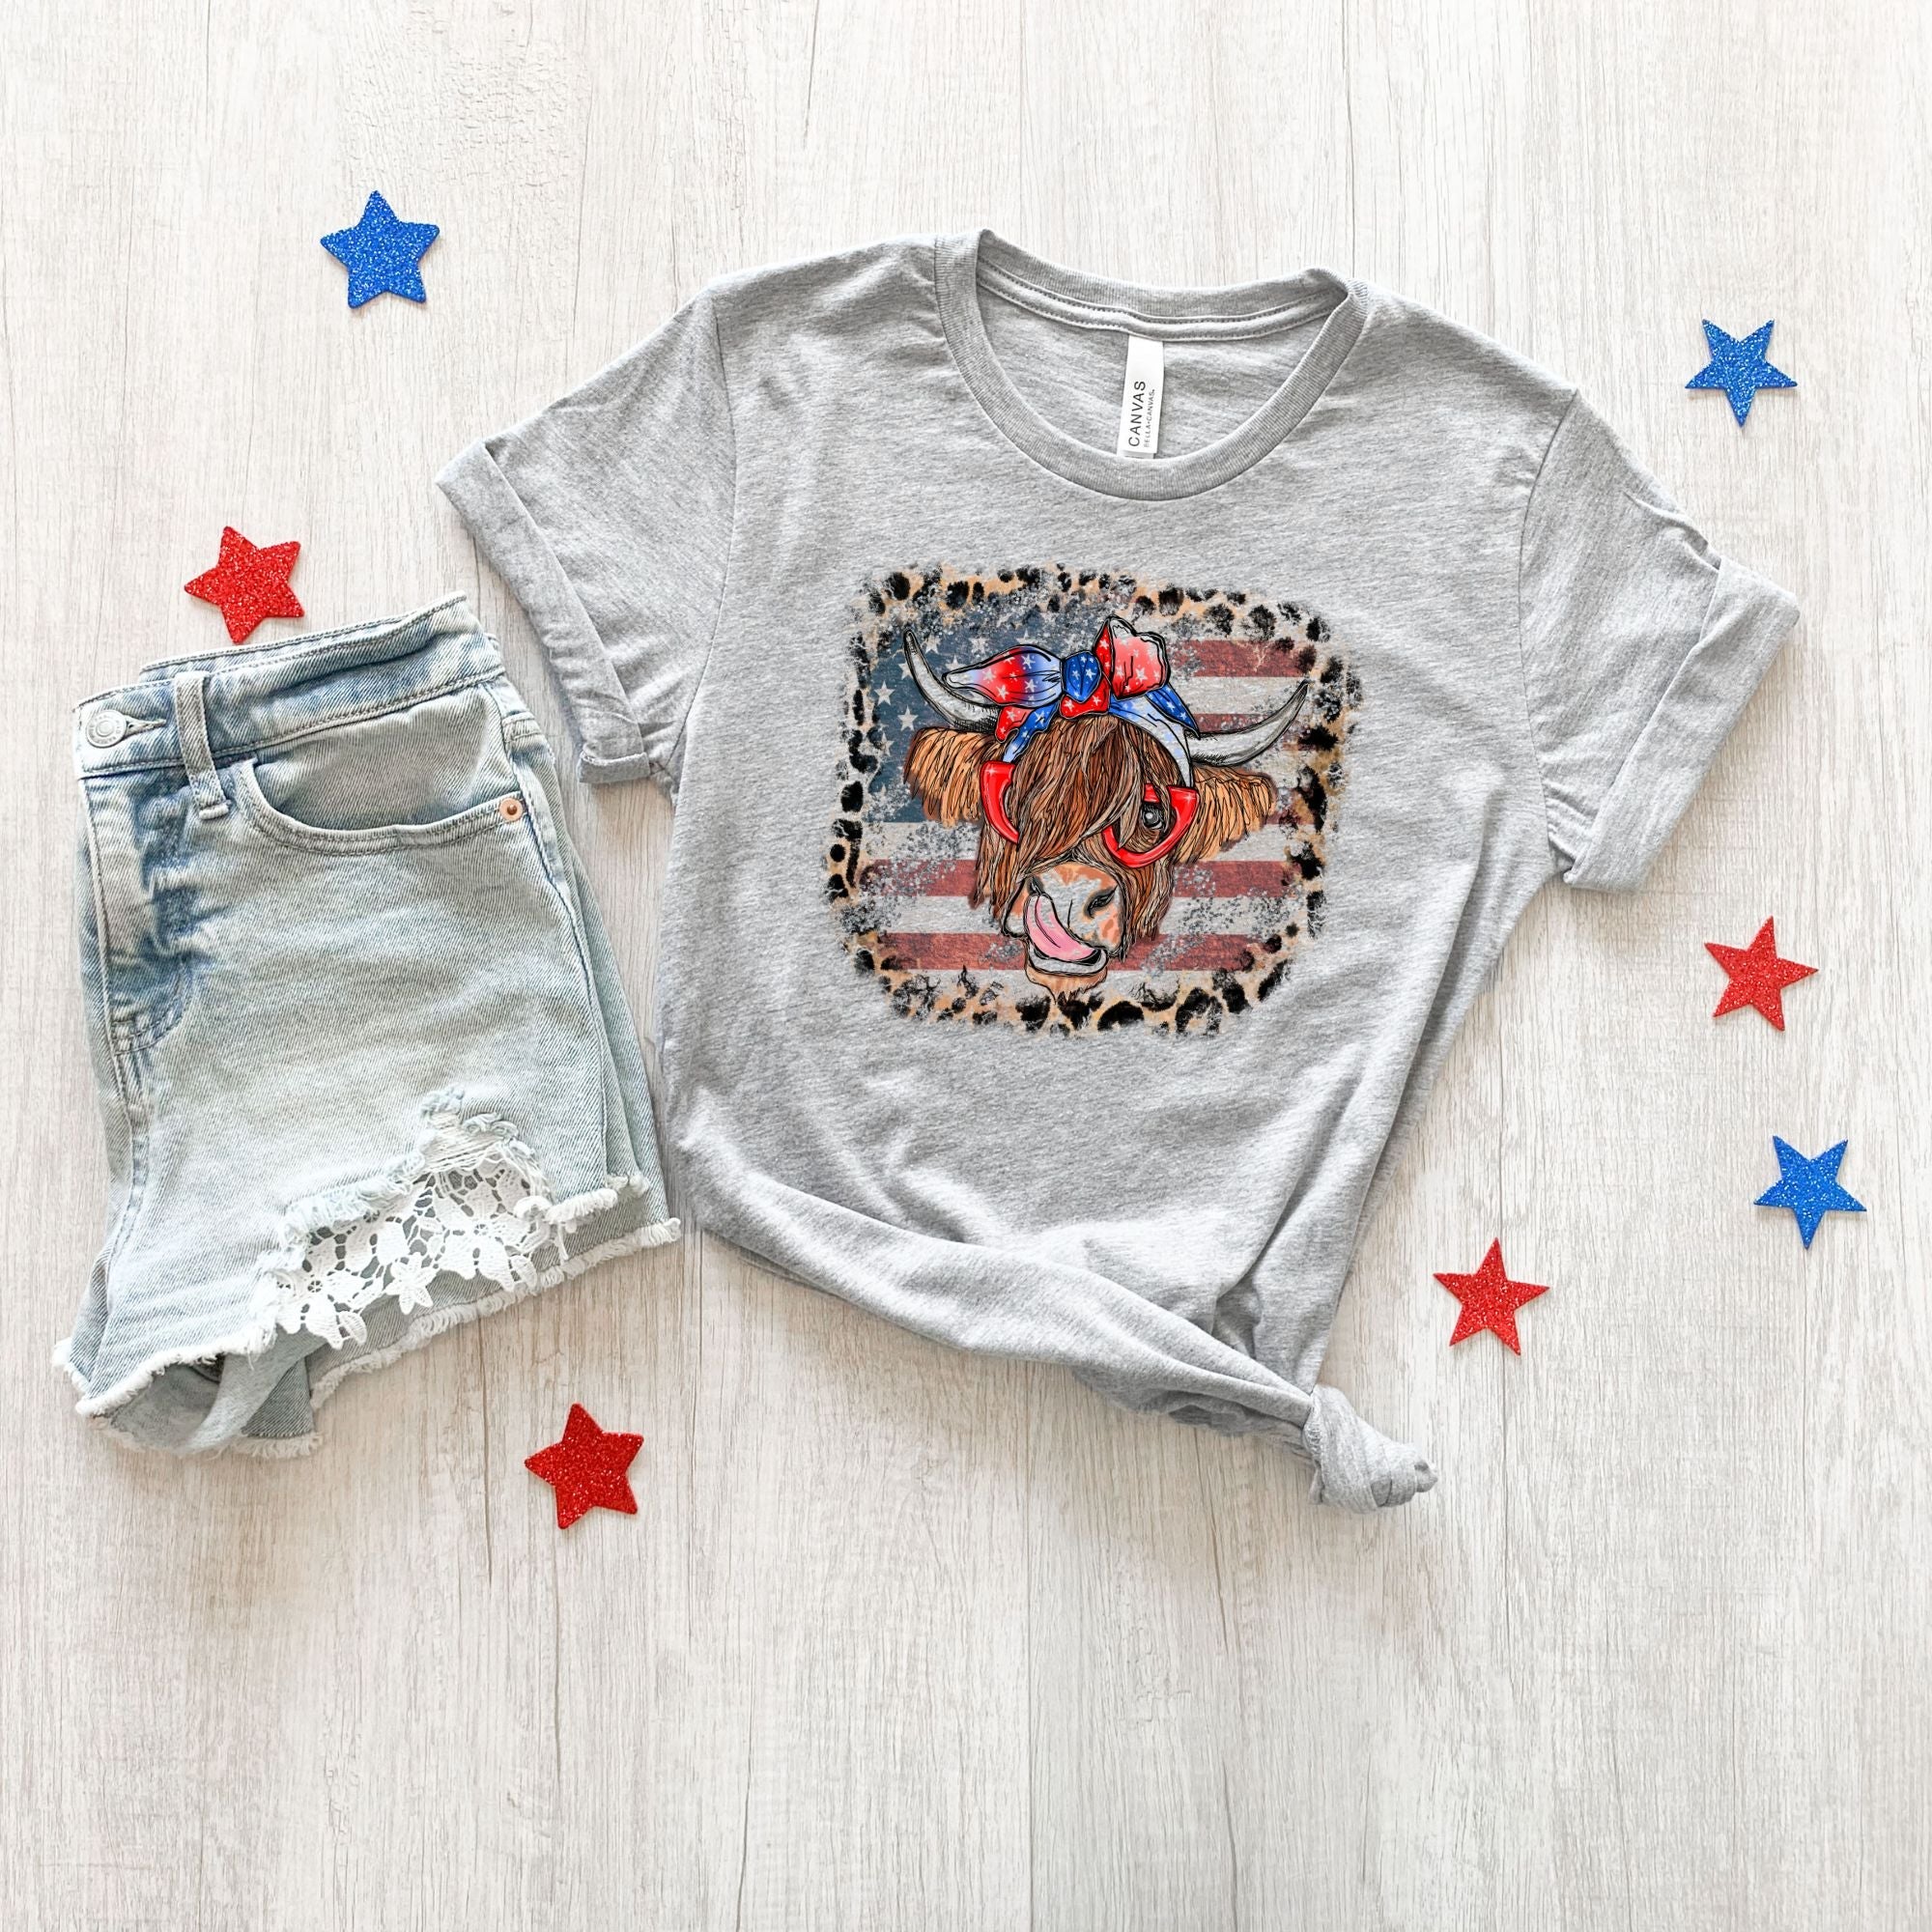 Patriotic Cow T Shirt for 4th Of July *UNISEX FIT*-Graphic Tees-208 Tees Wholesale, Idaho